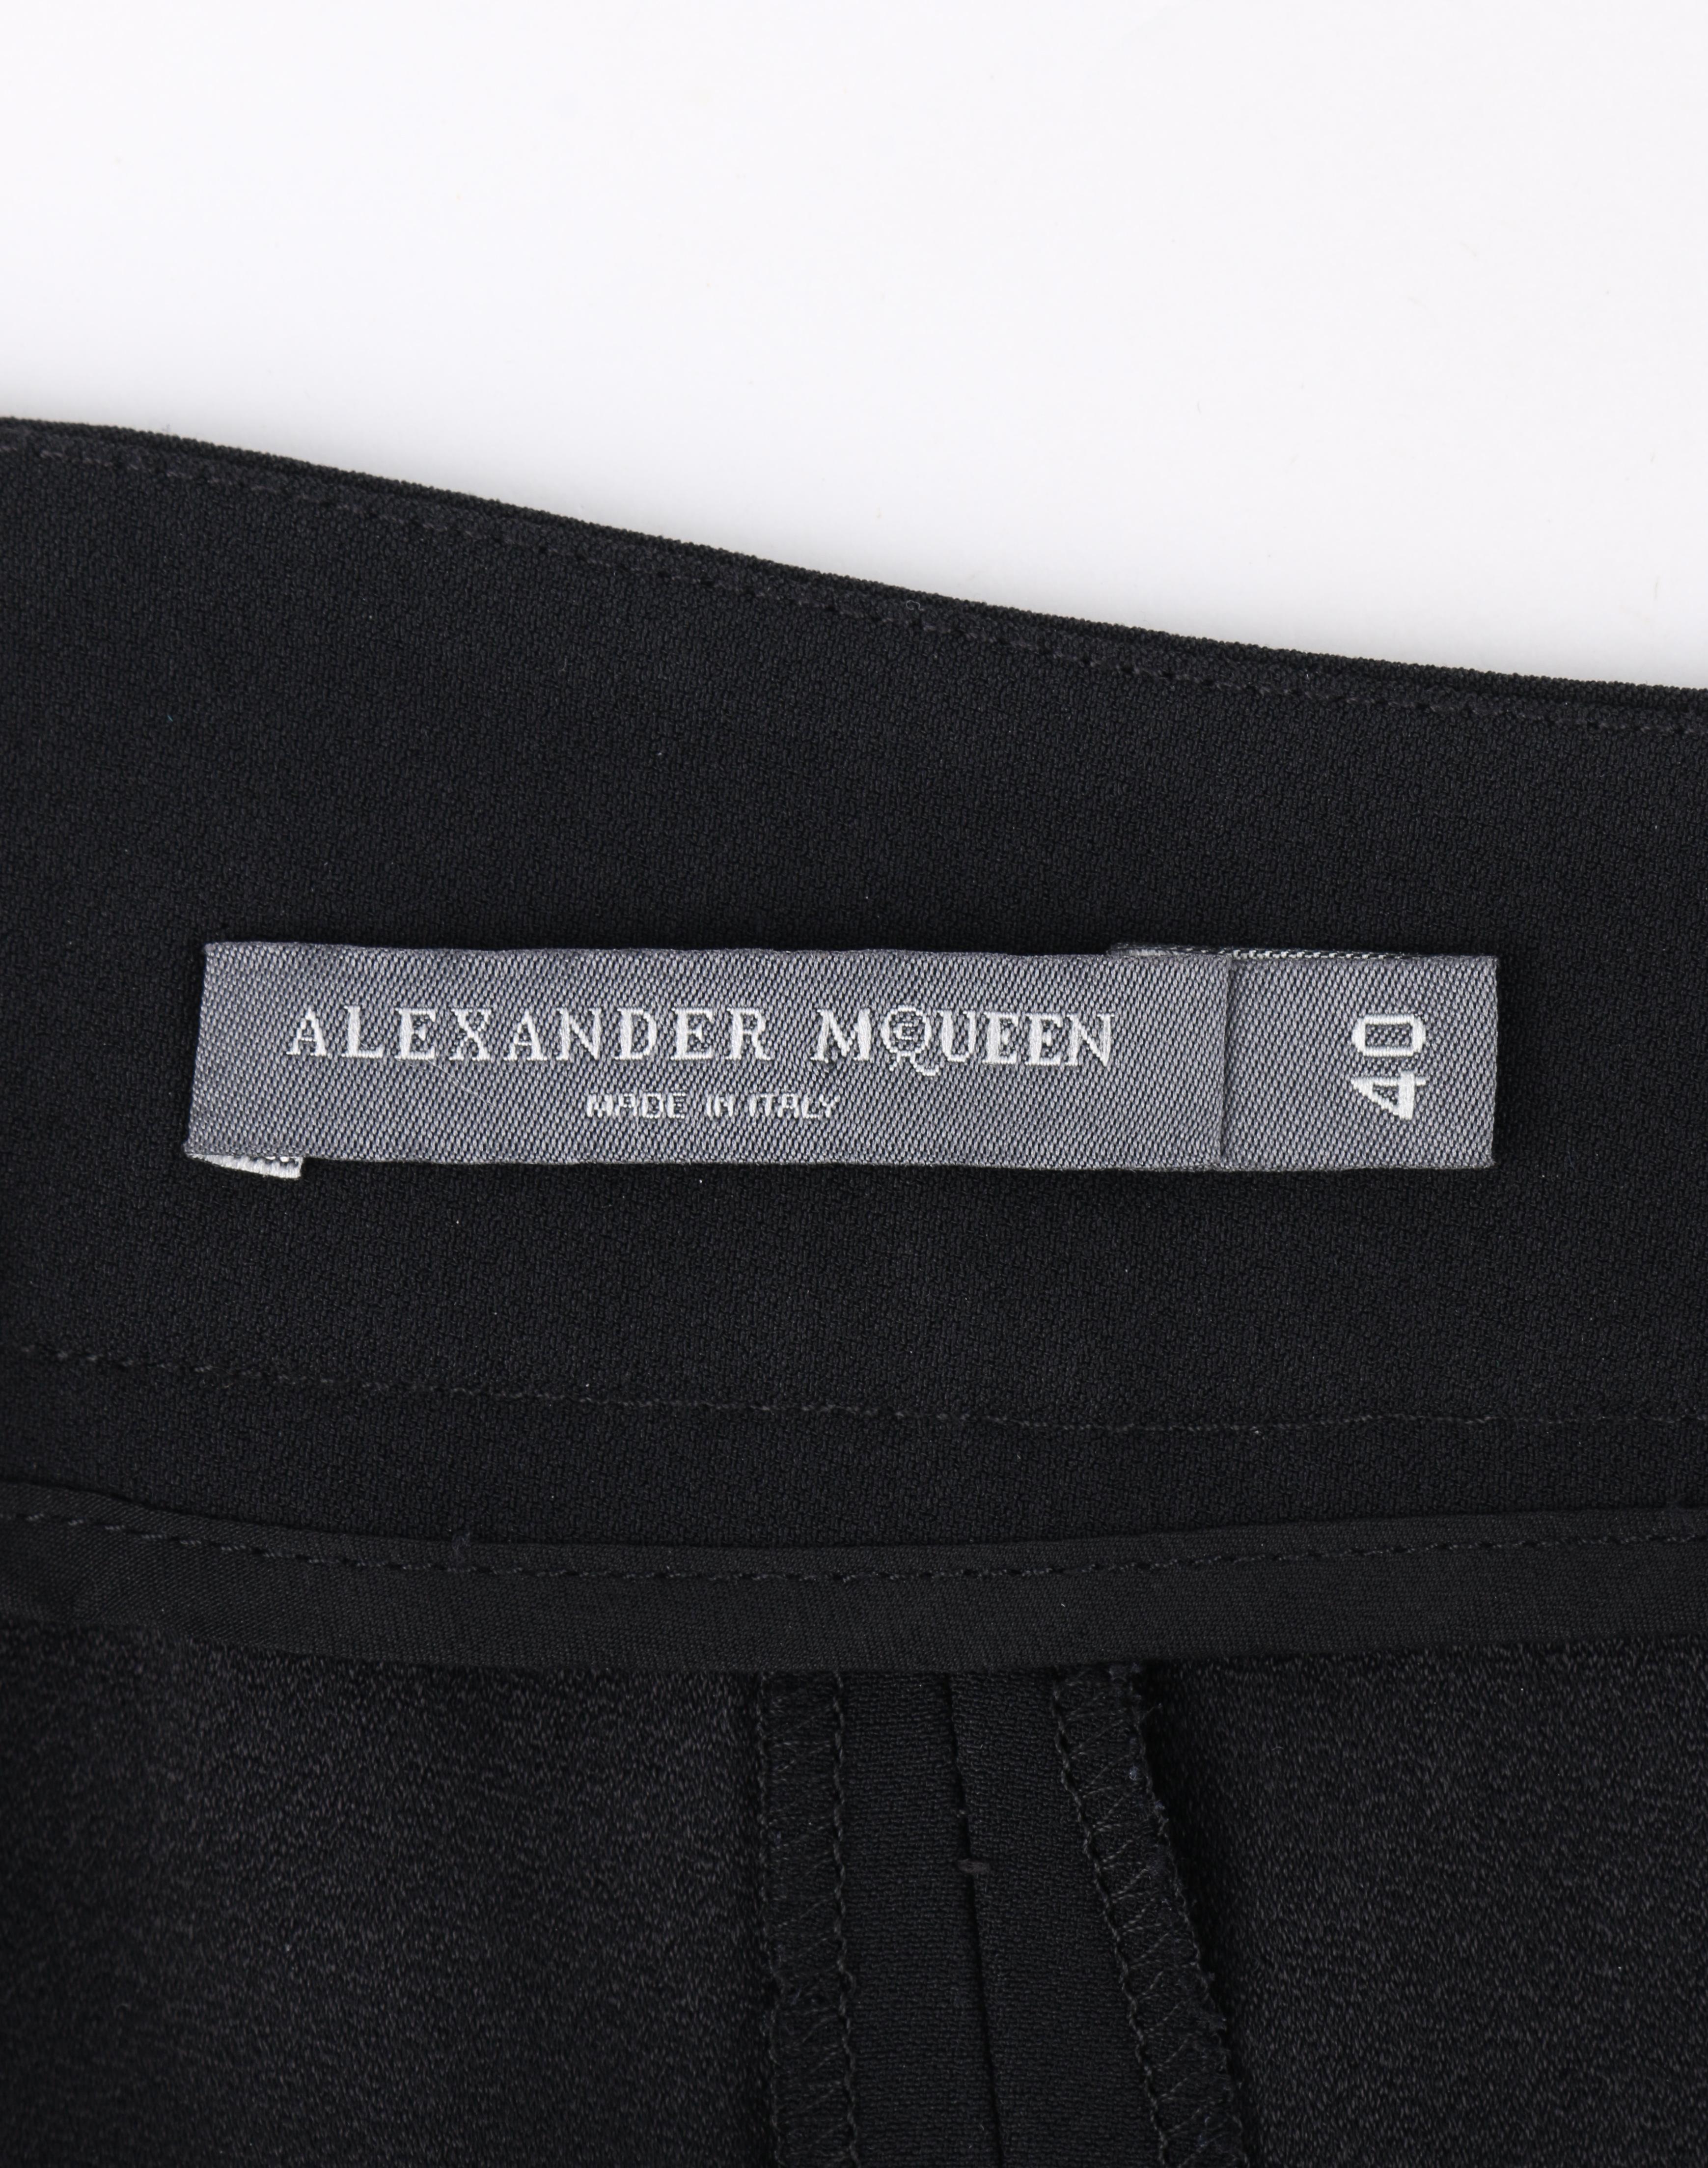 ALEXANDER McQUEEN S/S 2014 Black and Red Cropped Trouser Pant Slacks at ...